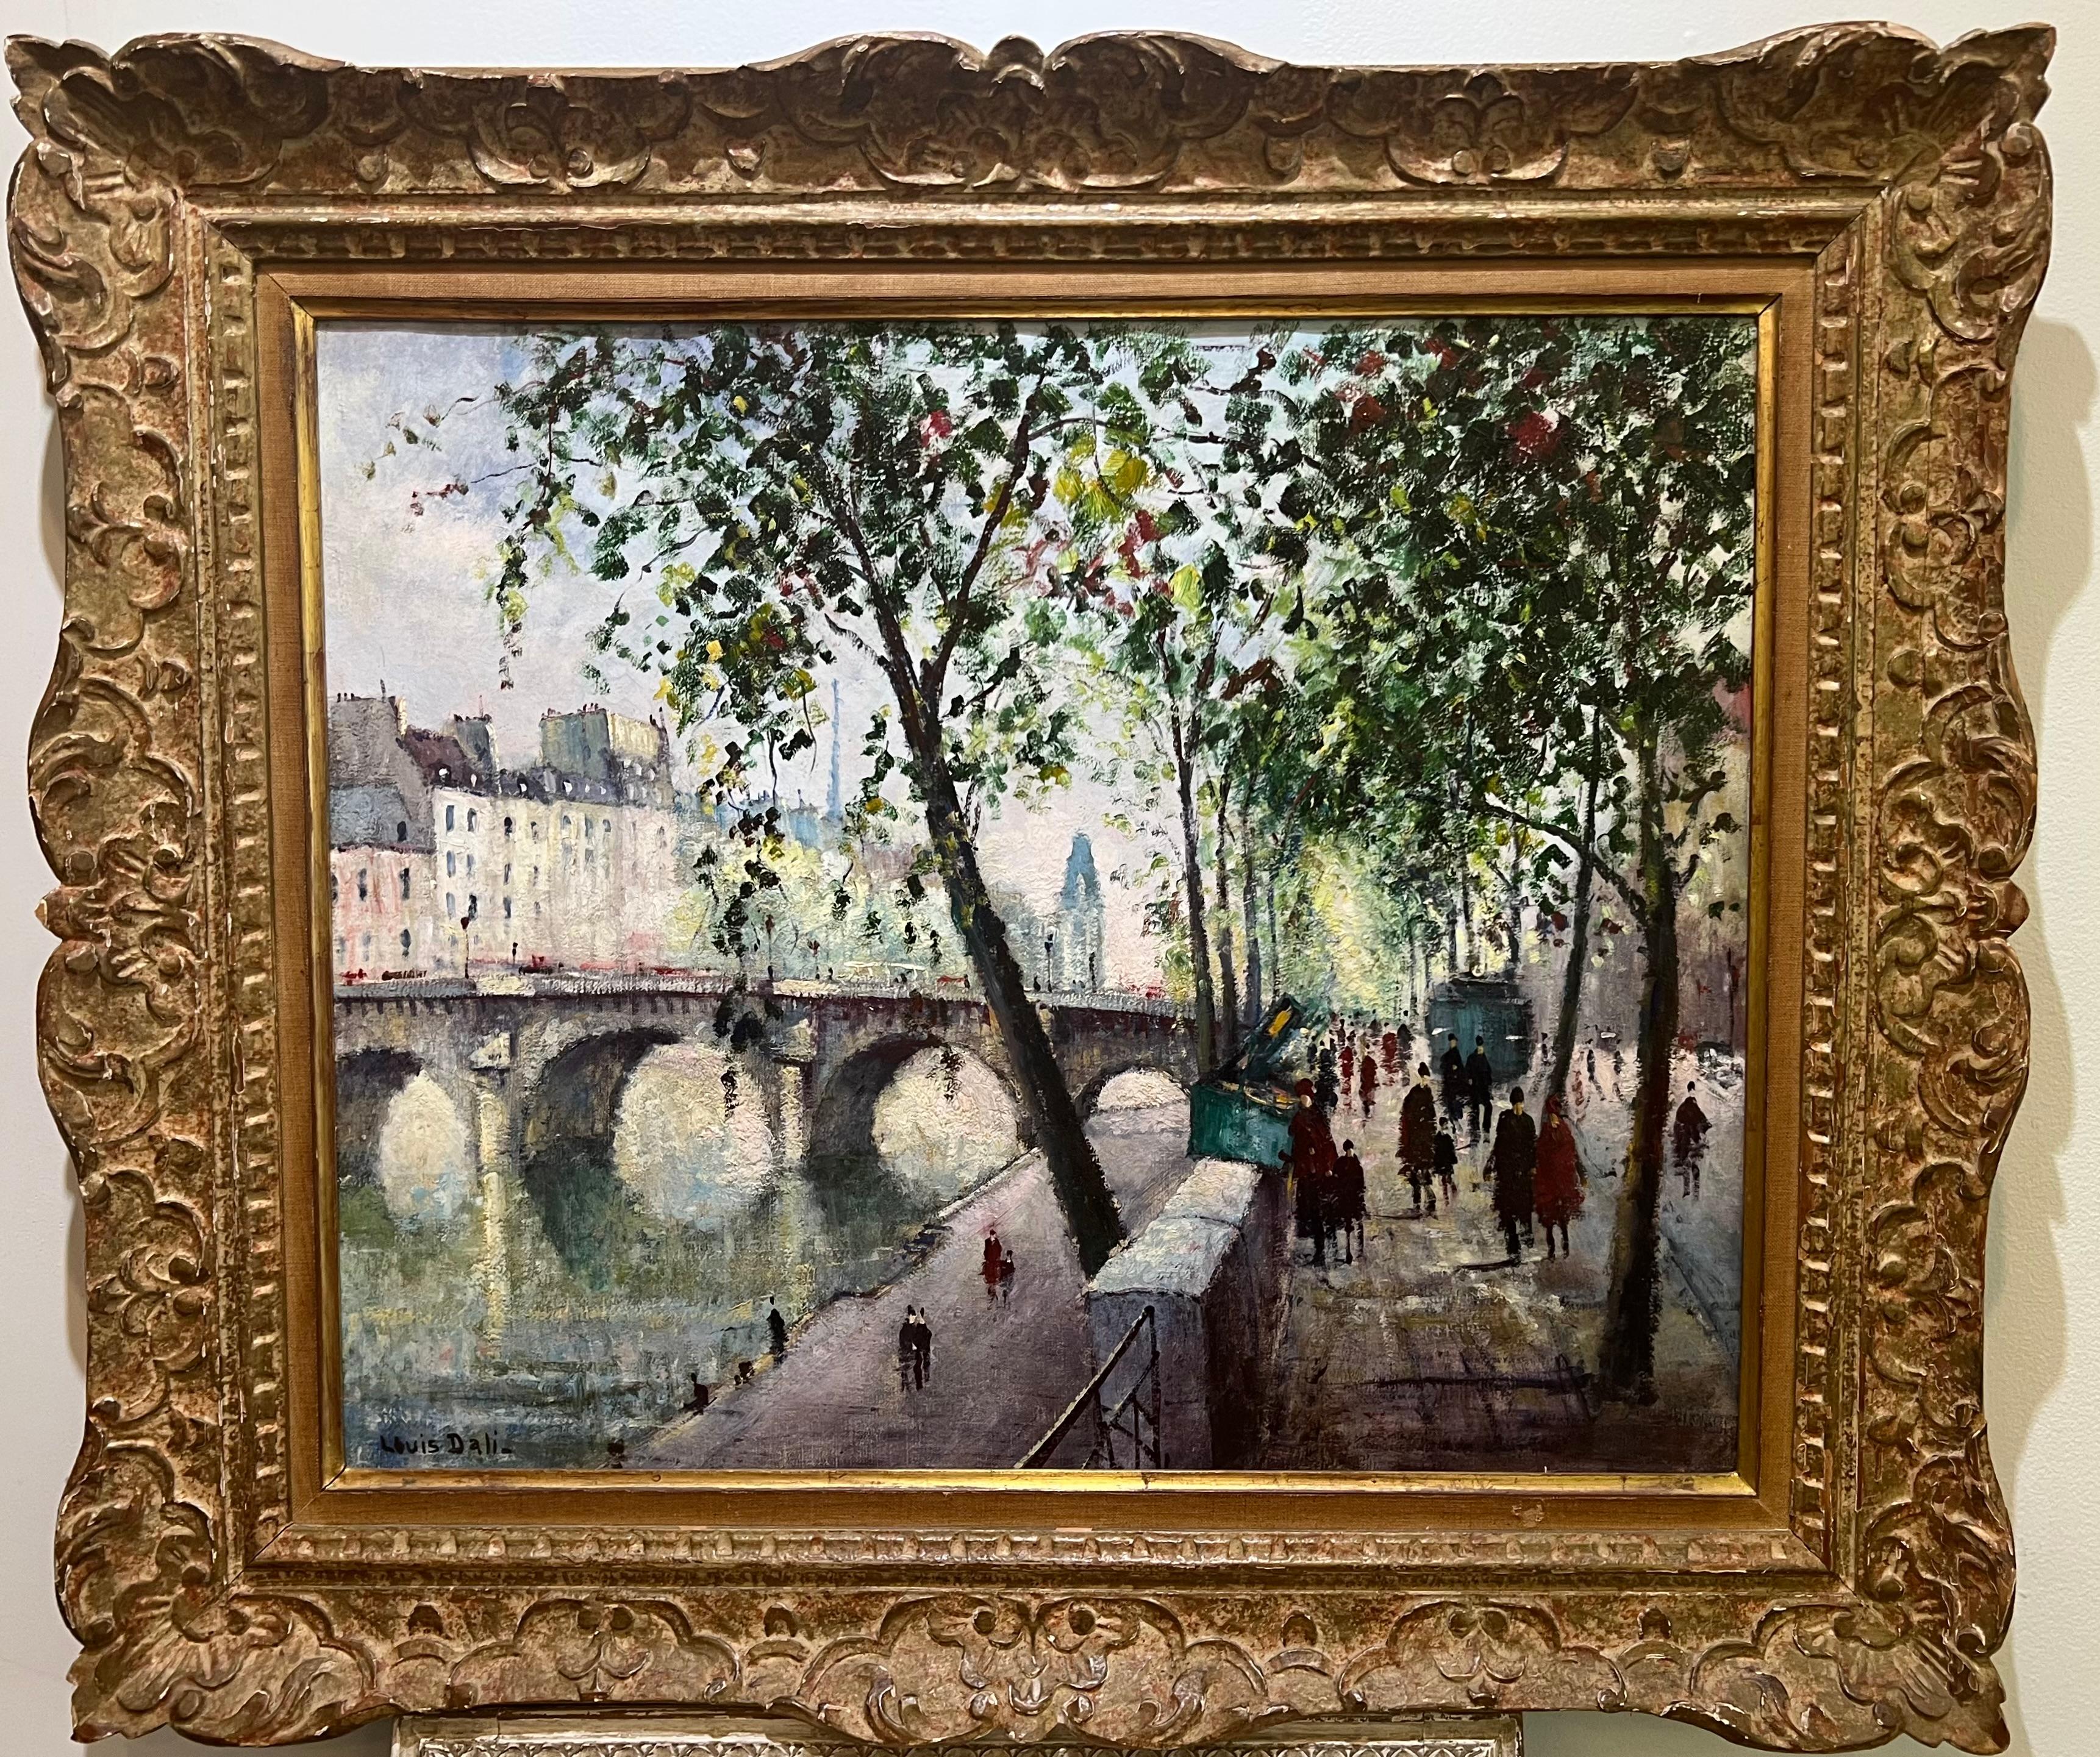 Large Impressionist PONT NEUF Parisian Seine River w/ Figures Strolling Painting For Sale 1